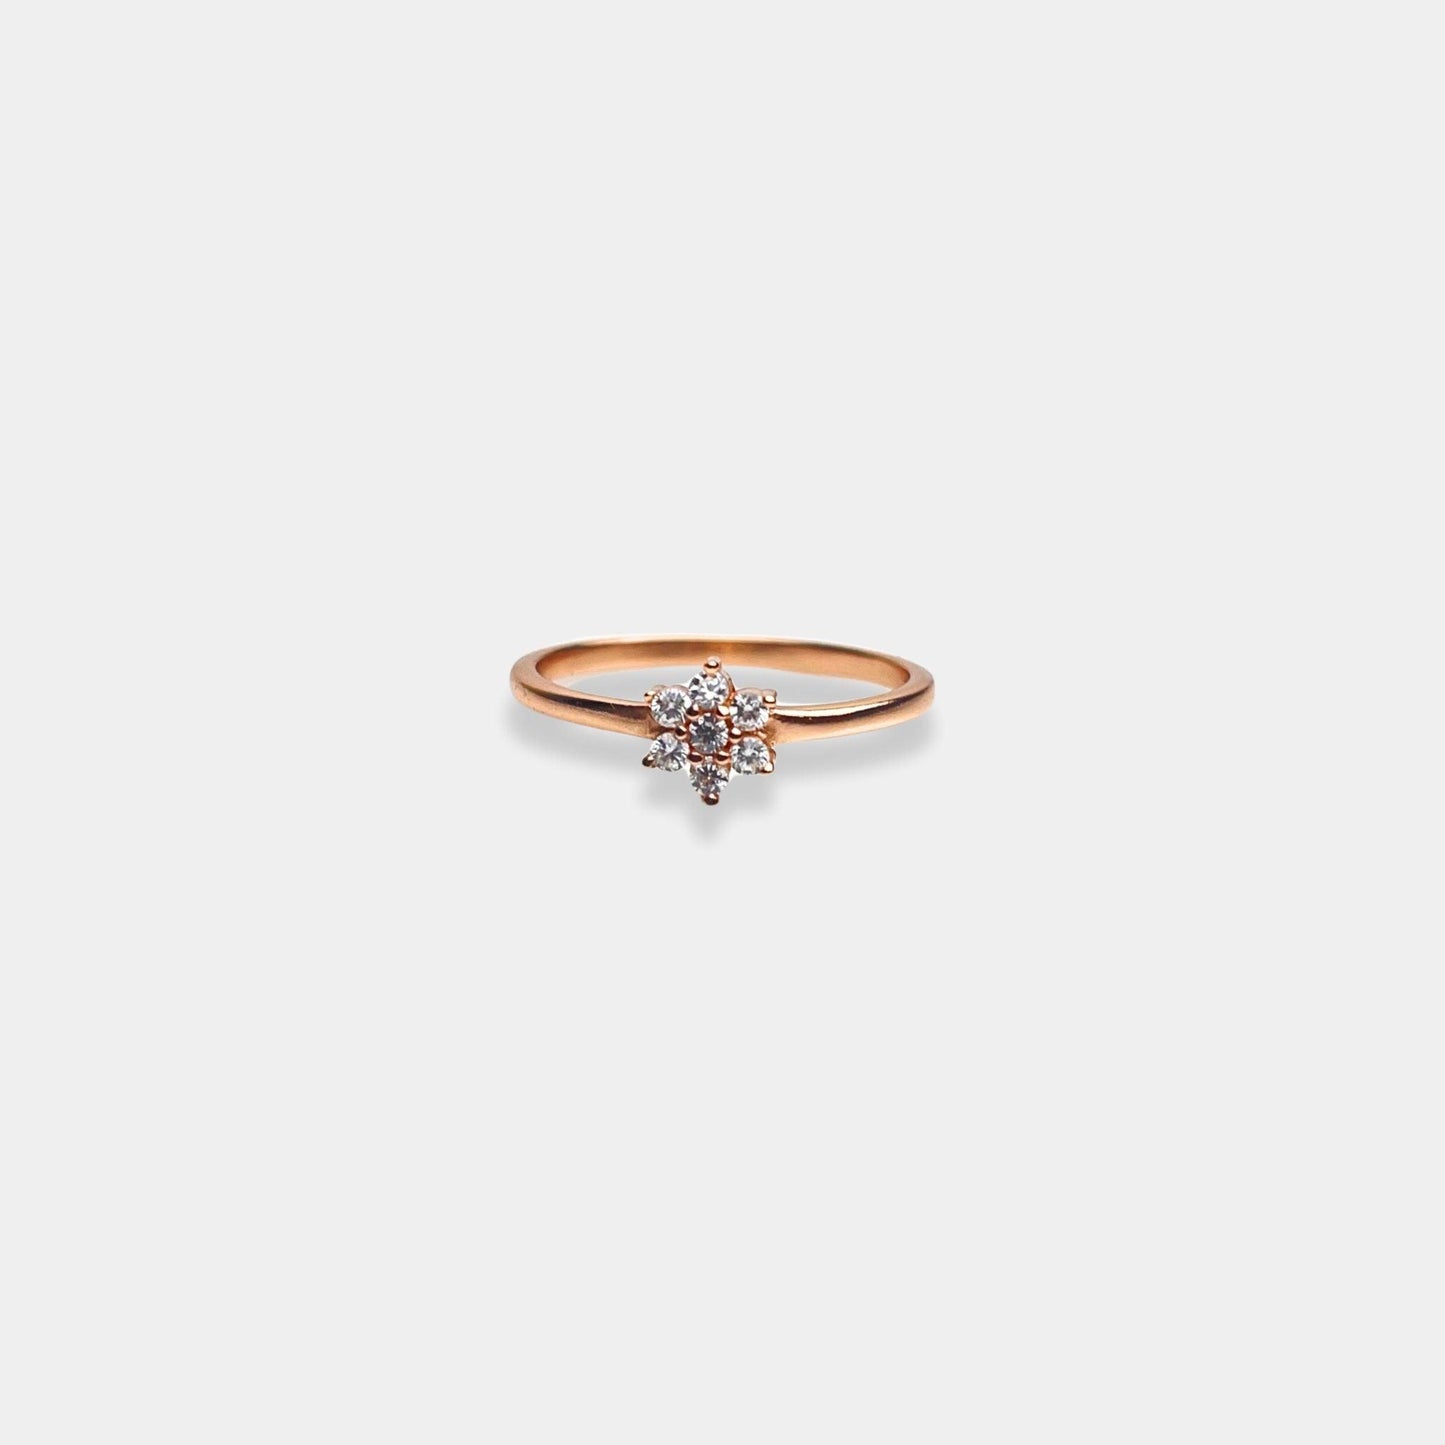 A sterling silver ring with a petite diamond nestled in the center, beautifully crafted in rose gold.